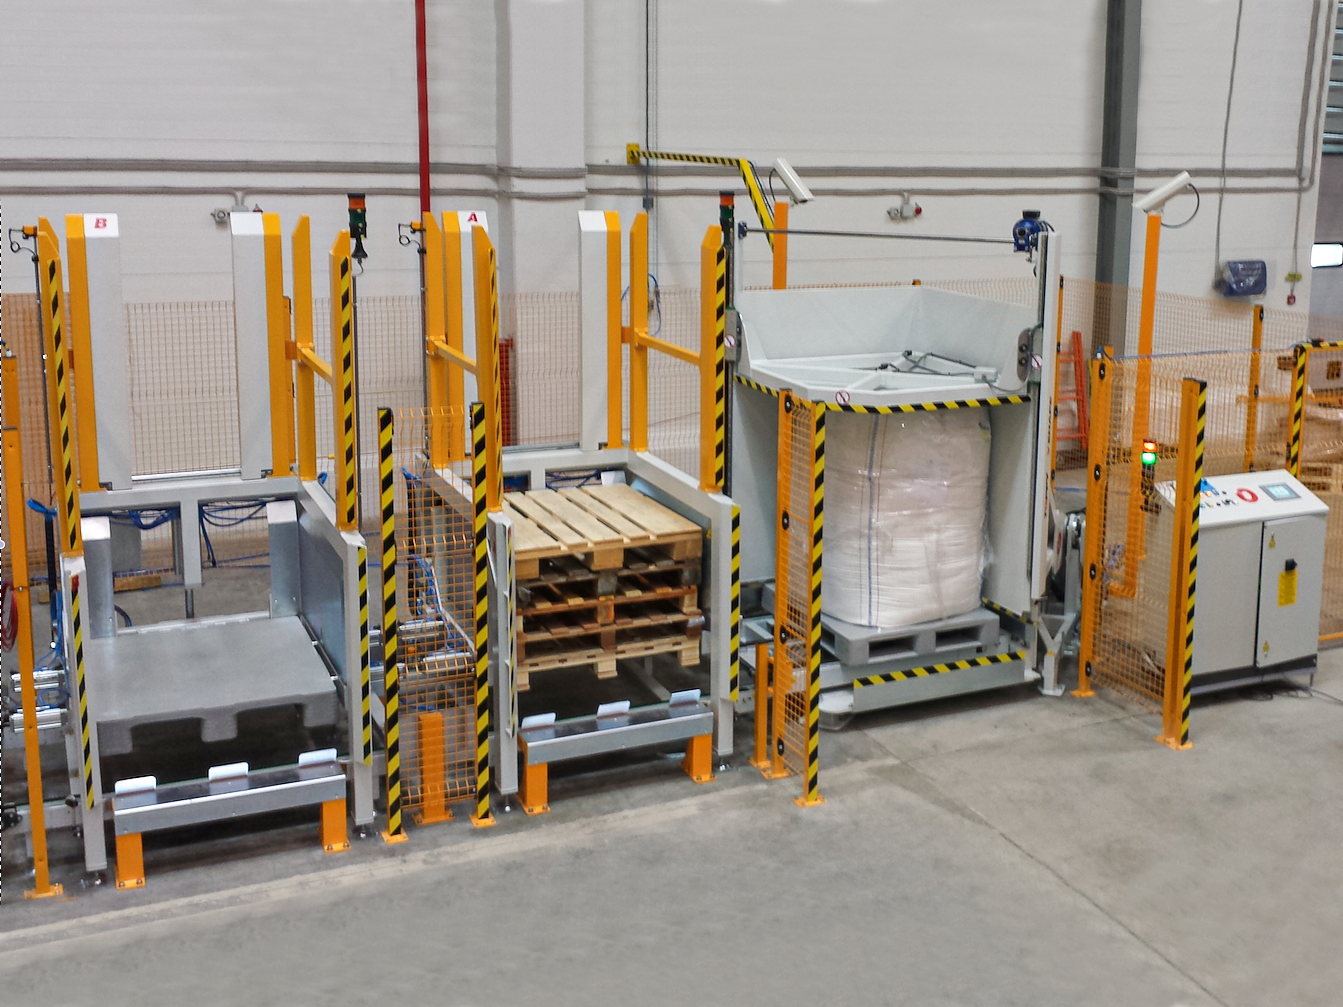 GROB Systems - Our pallet changer system improves the productivity